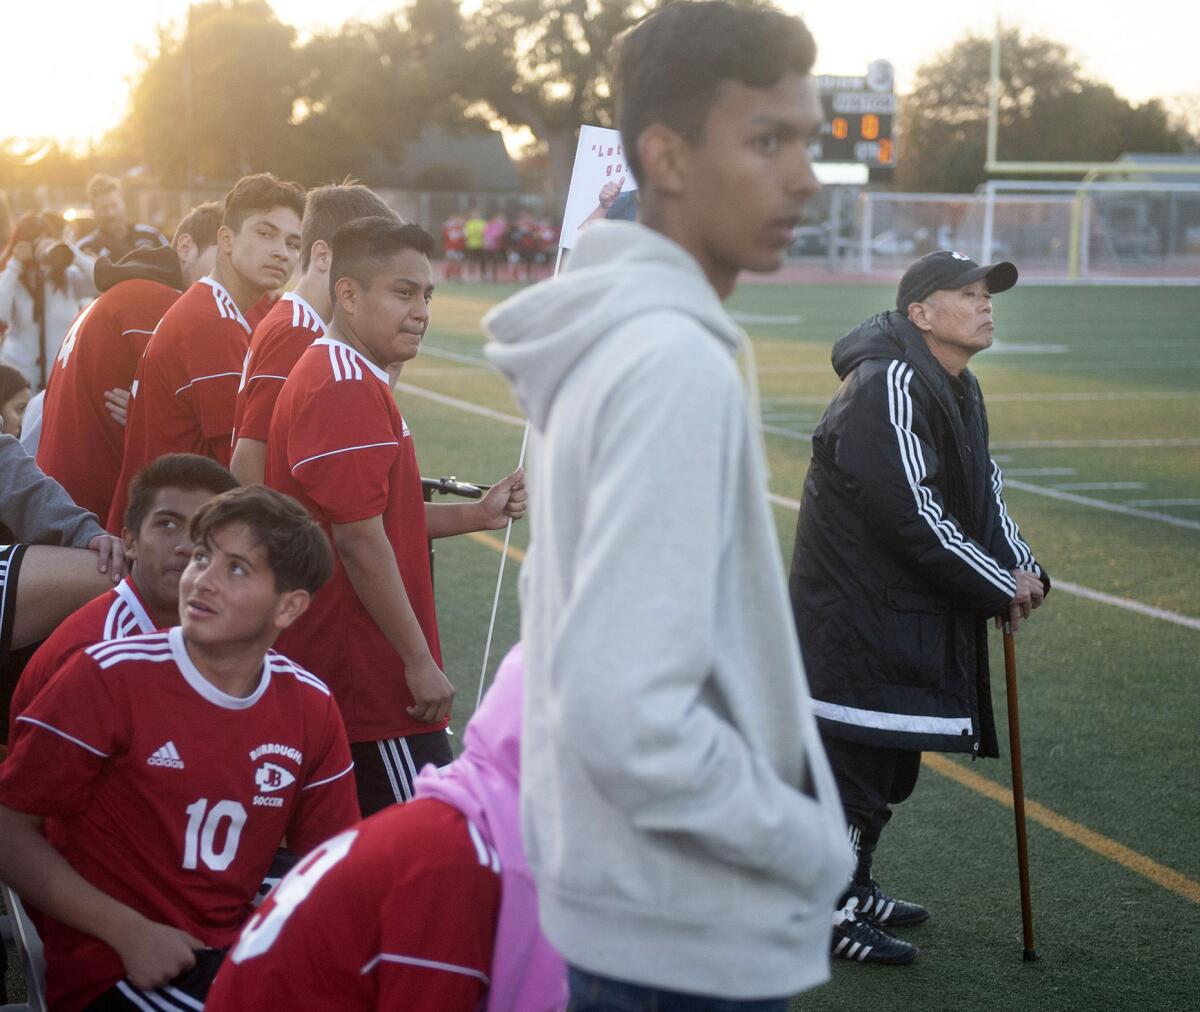 Former Burroughs High boys soccer coach Mike Kodama, far right, watches the action of Thursday's game against Burbank. (Photo by Miguel Vasconcellos)